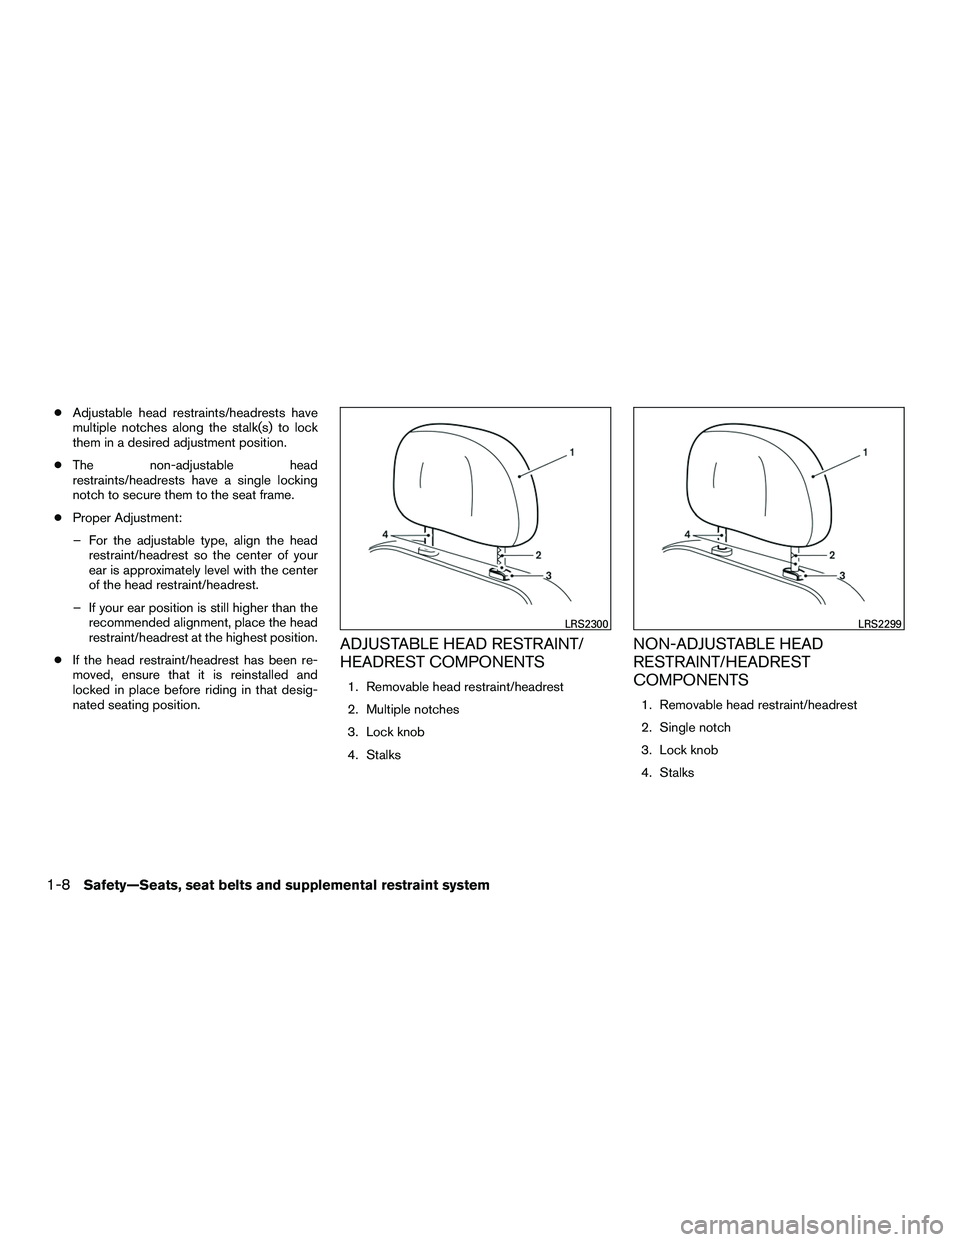 NISSAN NV200 2016 Owners Manual ●Adjustable head restraints/headrests have
multiple notches along the stalk(s) to lock
them in a desired adjustment position.
● The non-adjustable head
restraints/headrests have a single locking
n